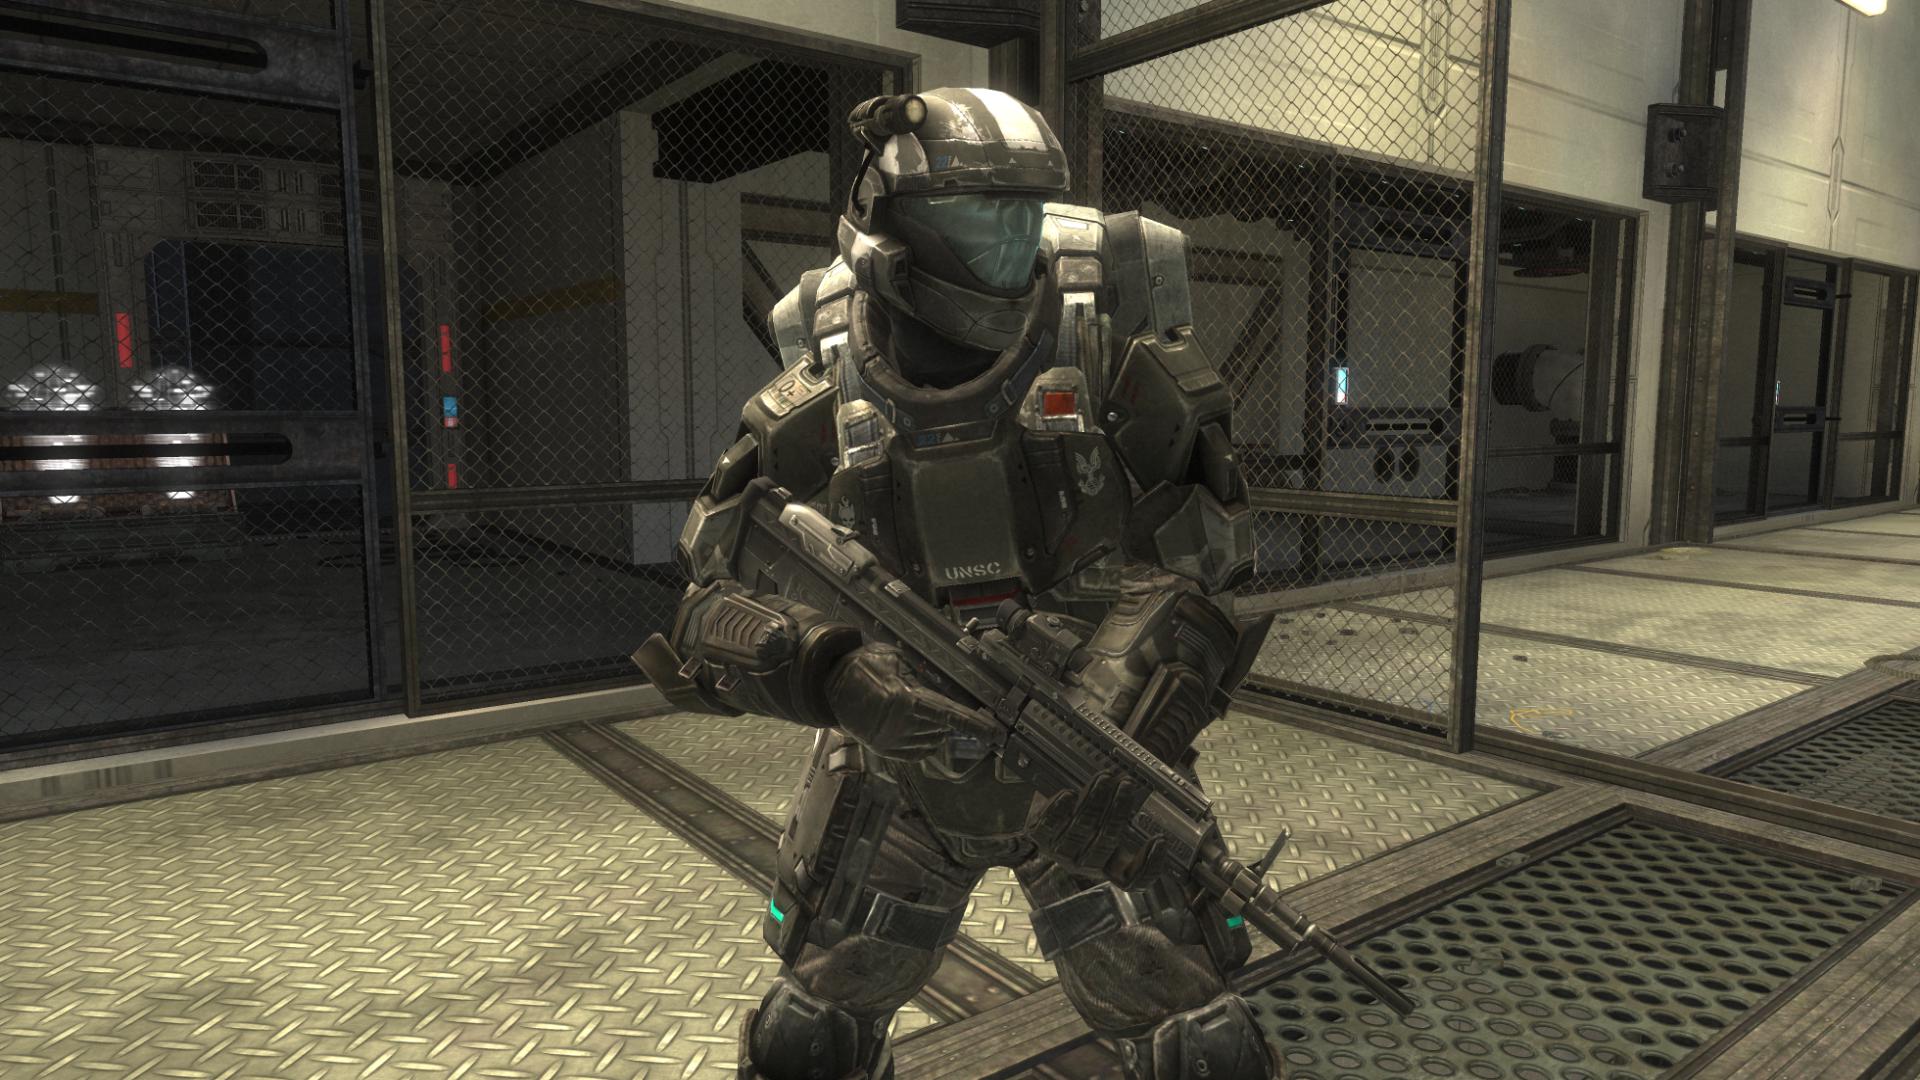 Halo Reach: ODST Mk I. Halo Costume and Prop Maker Community